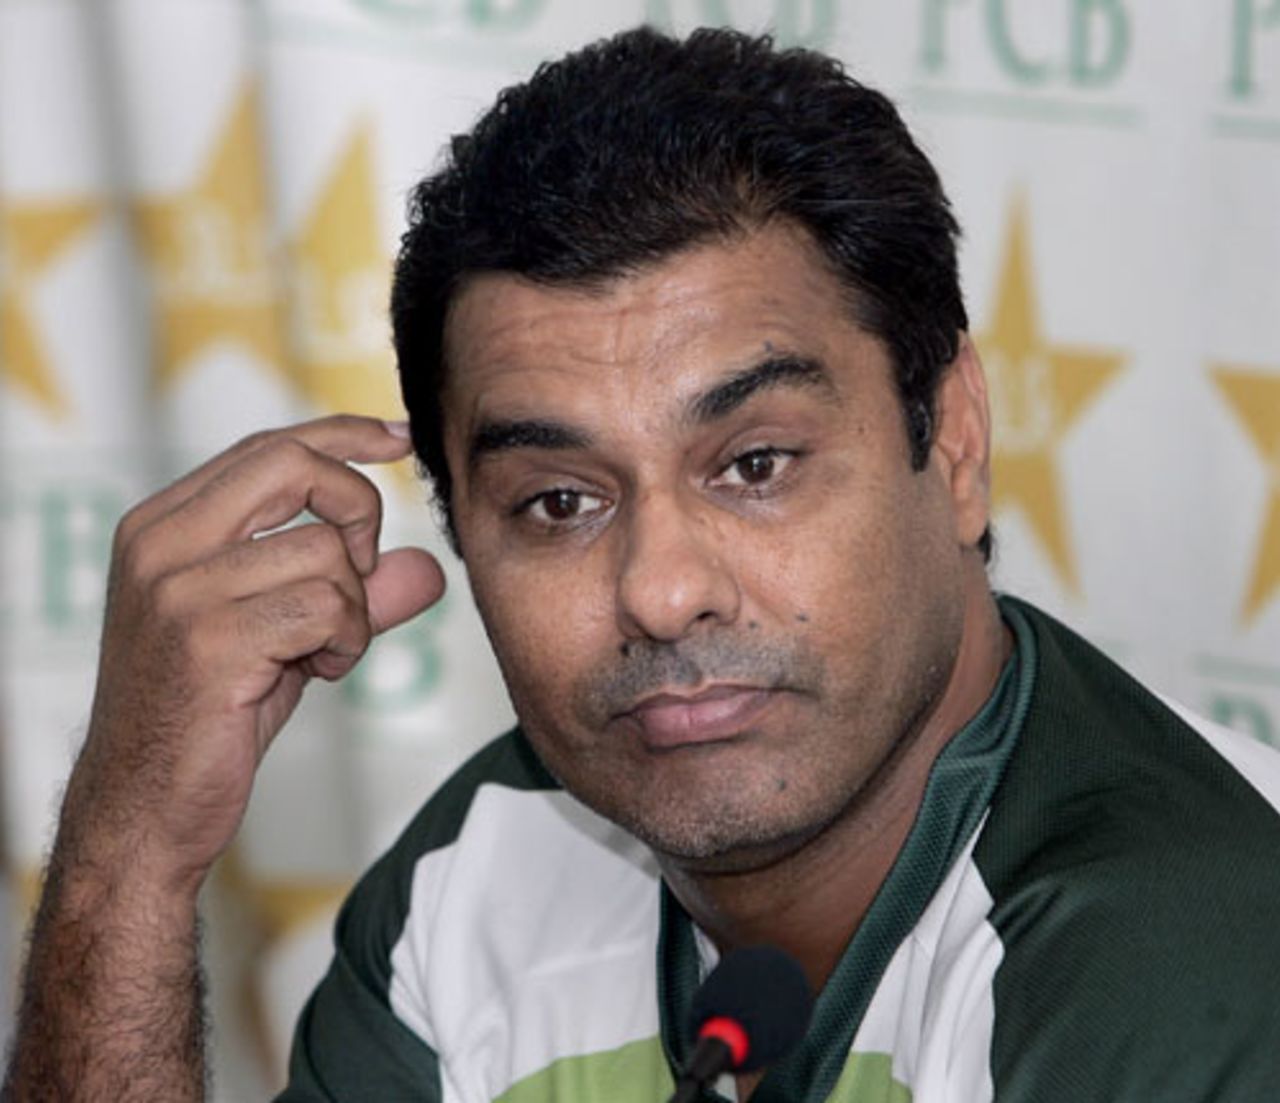 Pakistan coach Waqar Younis speaks to the press, Lahore, June 9, 2010